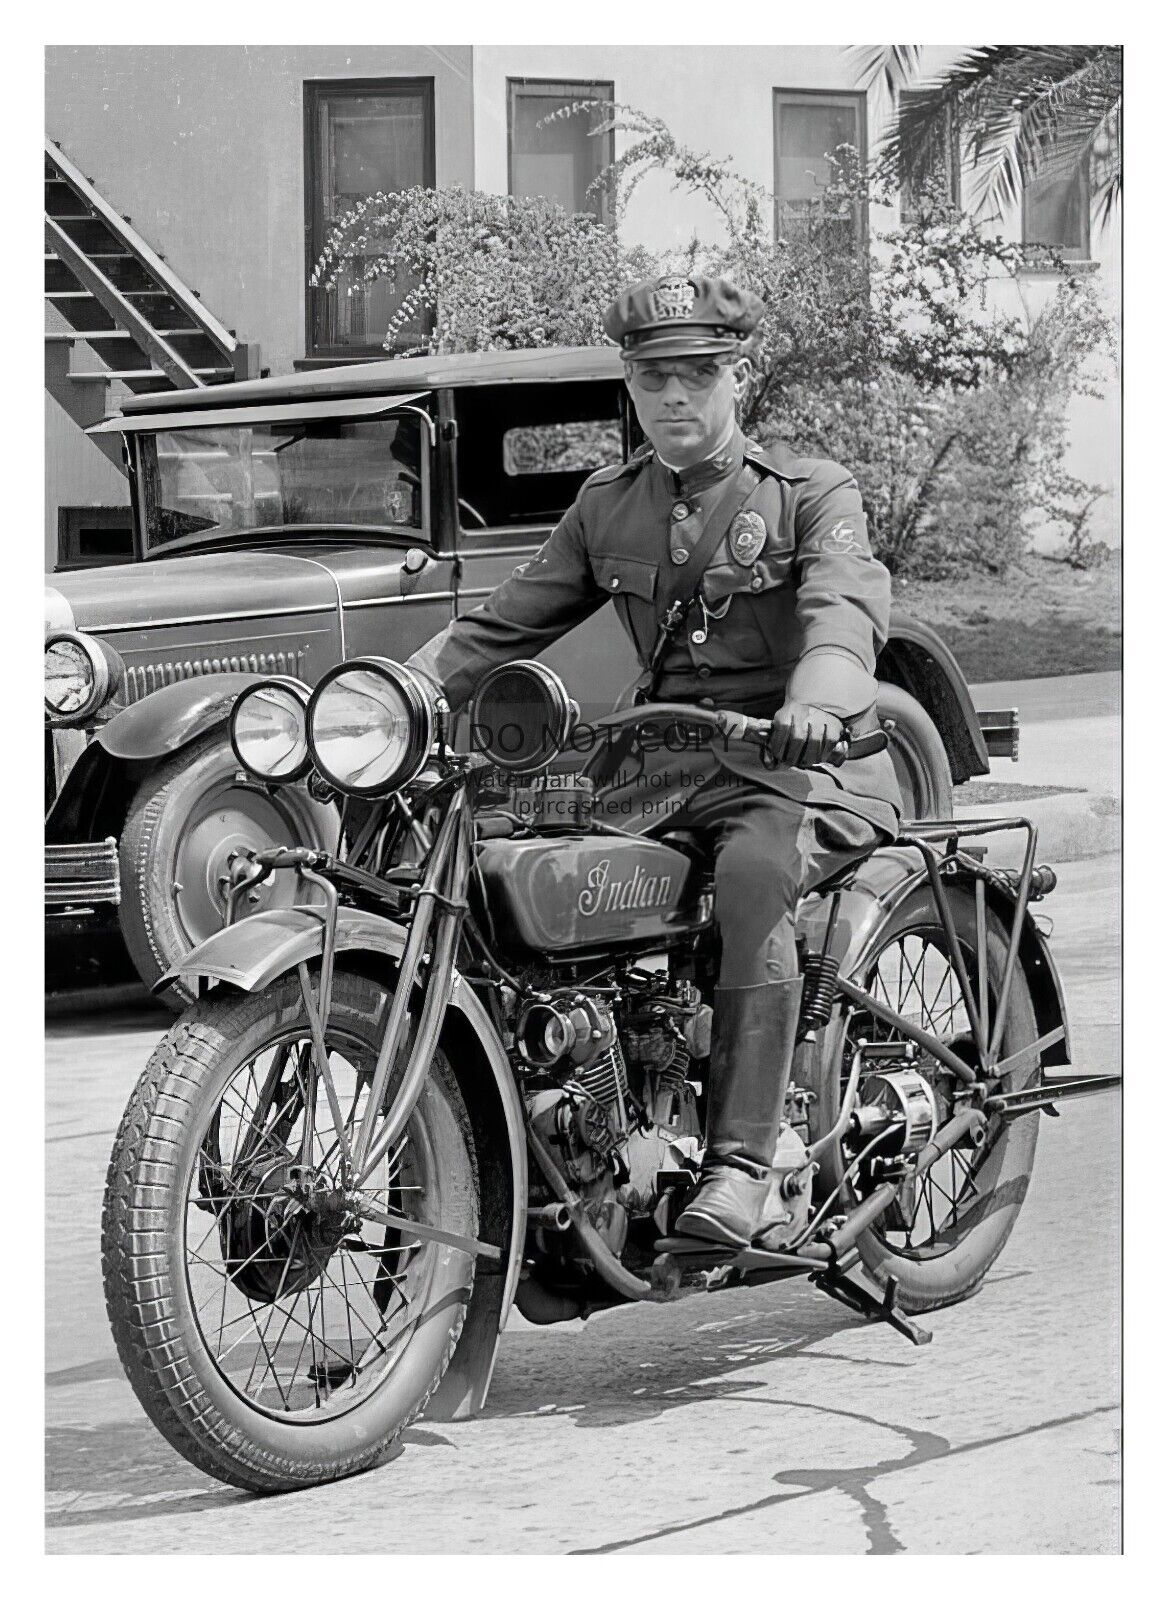 OLDTIME COP RIDING ON INDIAN MOTORCYCLE LOS ANGELES POLICE OFFICER 5X7 PHOTO